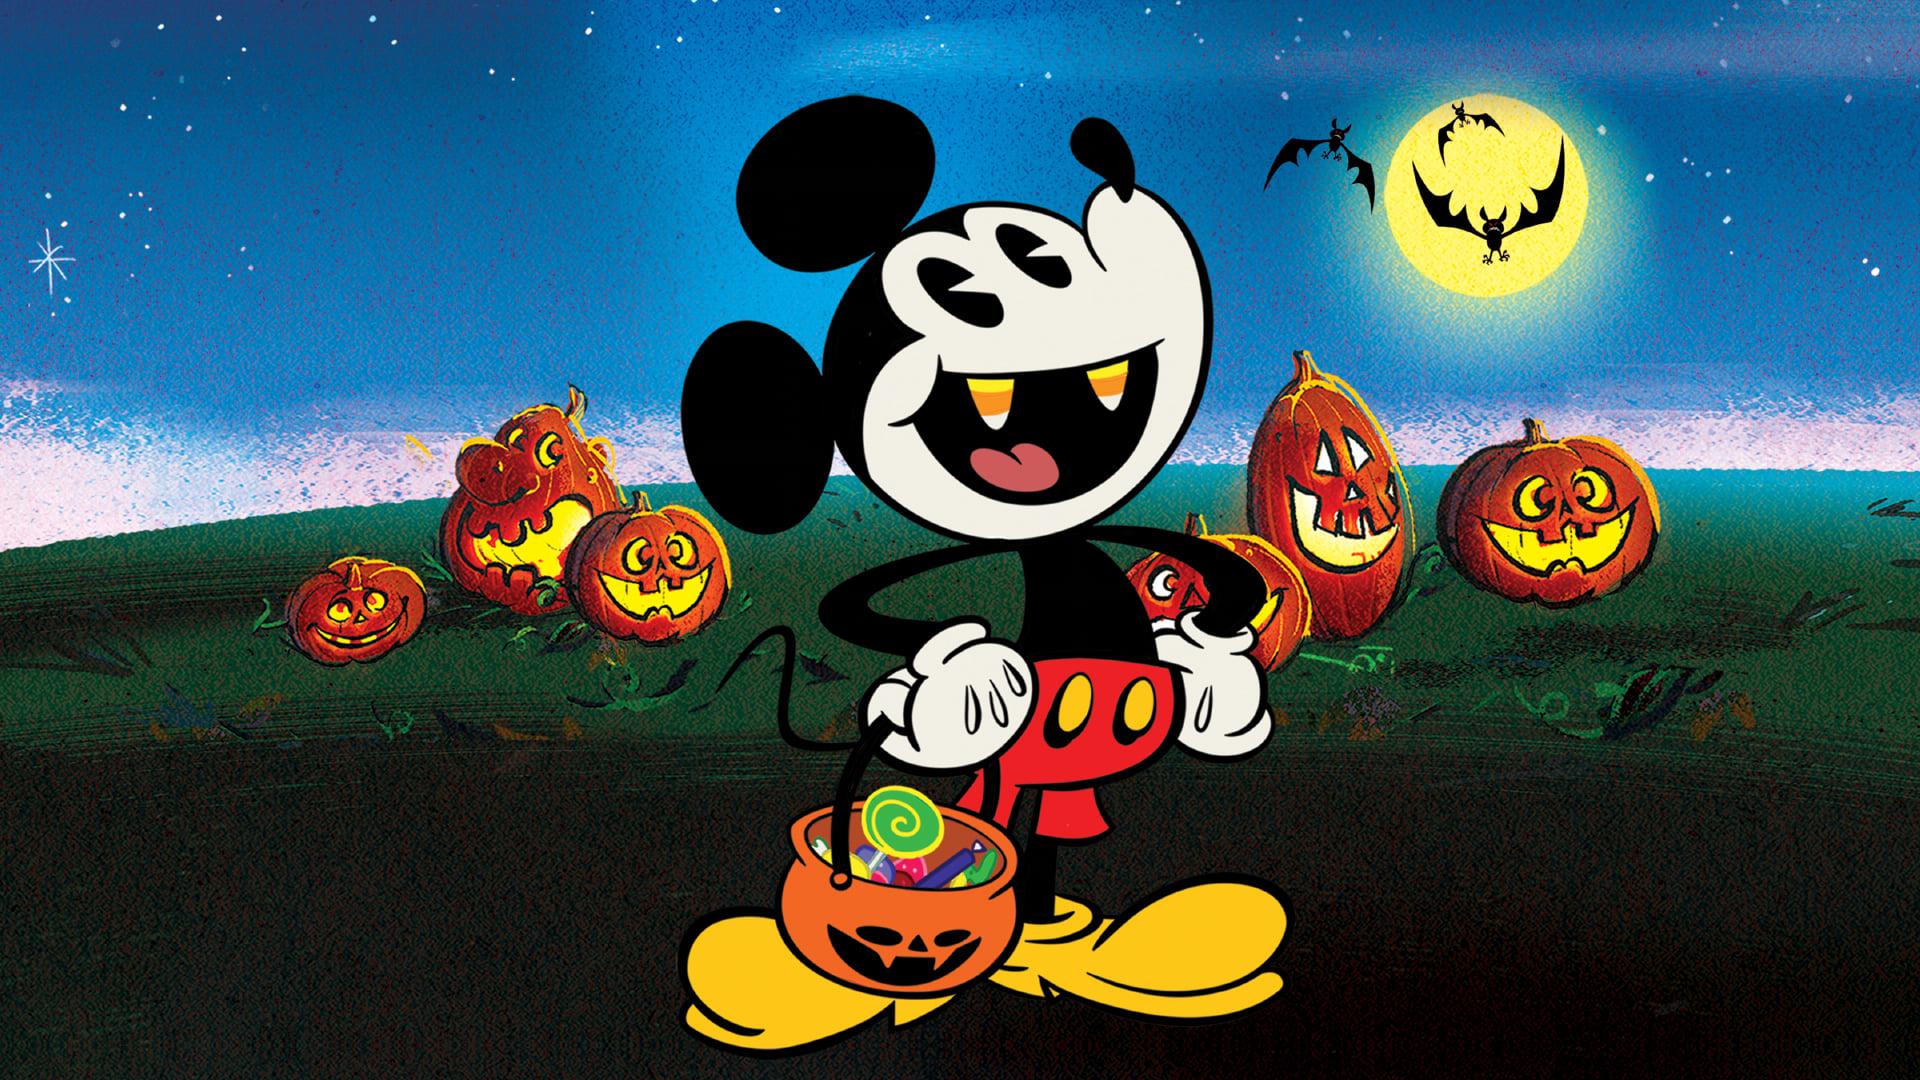 The Scariest Story Ever: A Mickey Mouse Halloween Spooktacular backdrop